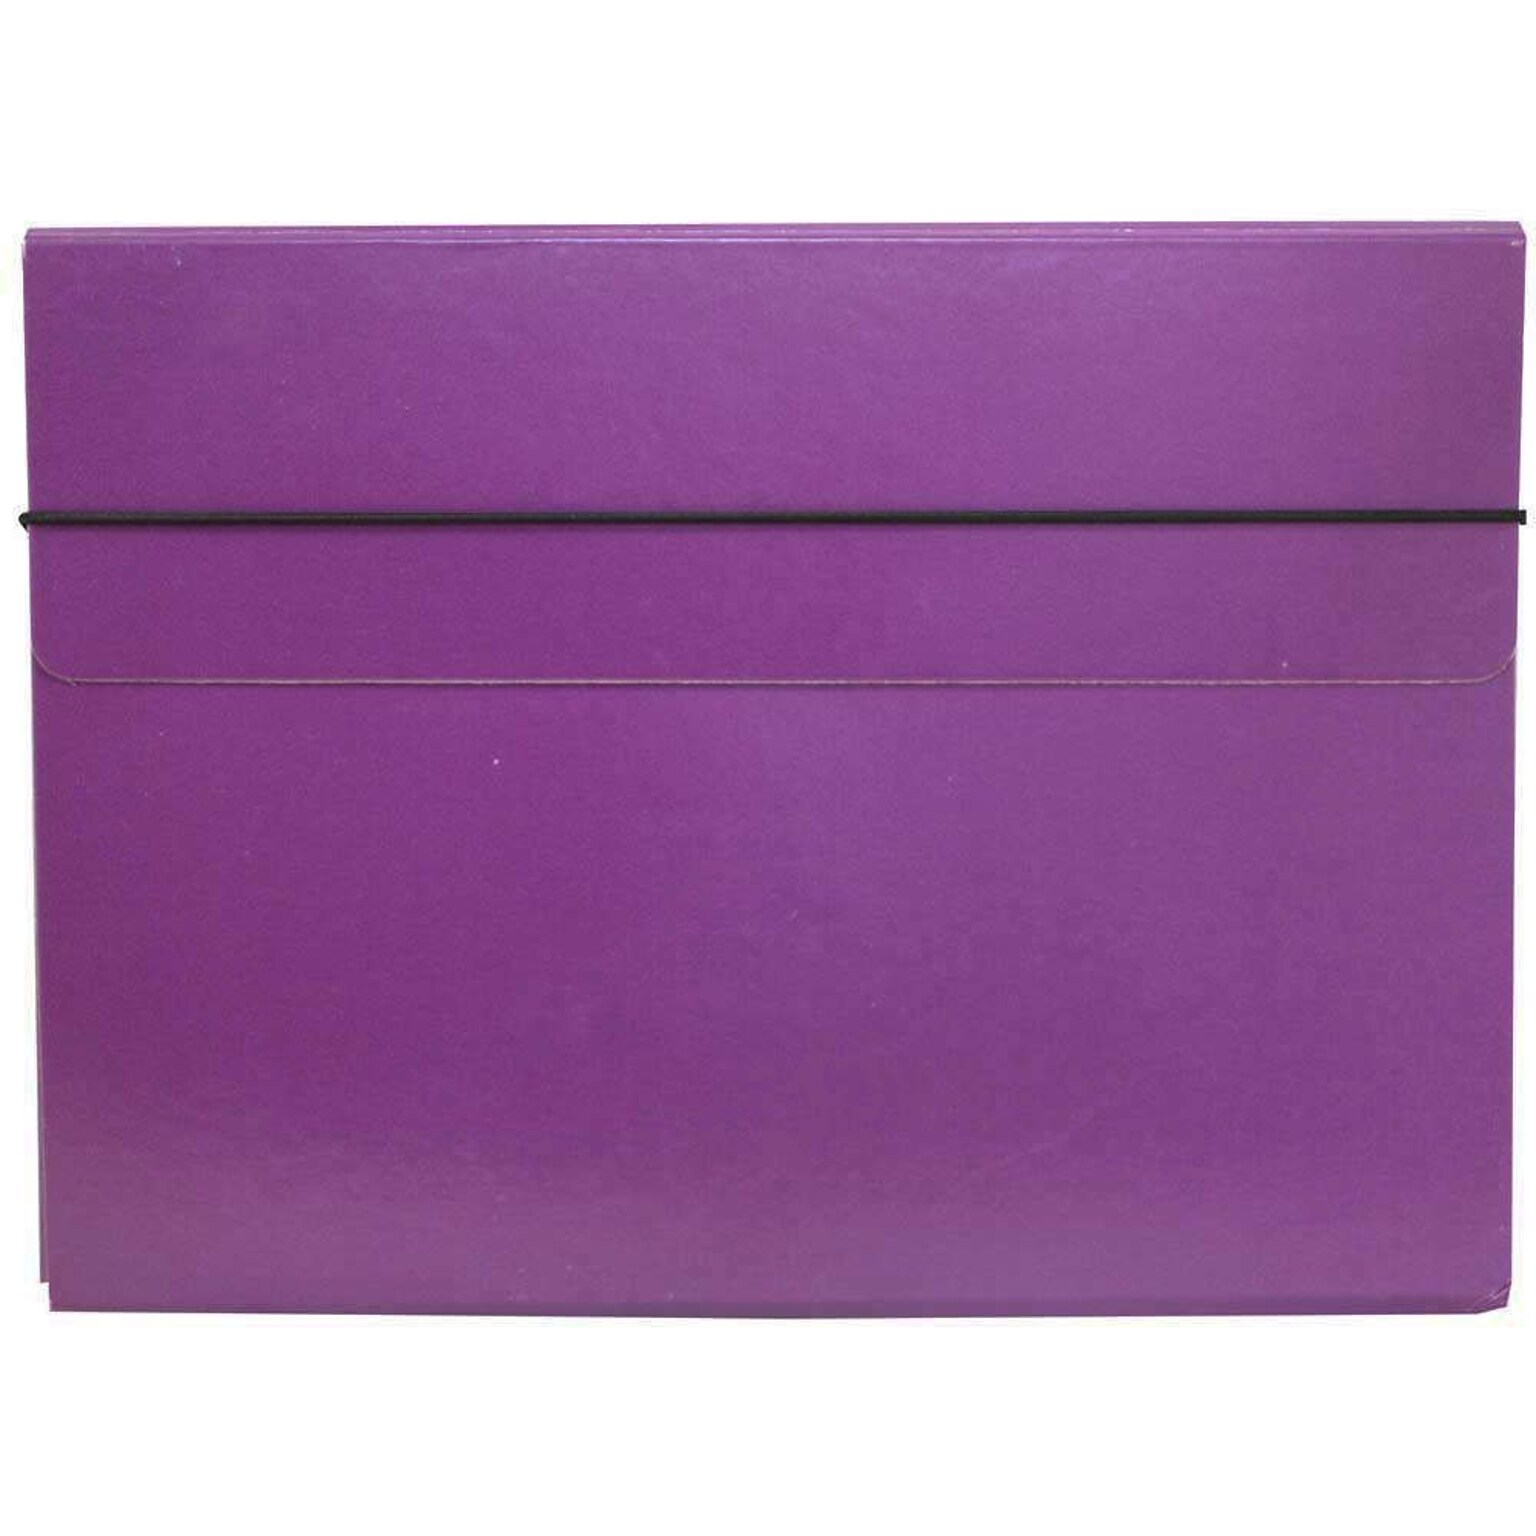 JAM Paper® Strong Thin Portfolio Carrying Case with Elastic Band Closure - 9 1/4 x 1/2 x 12 1/2 - Purple - Sold Individually